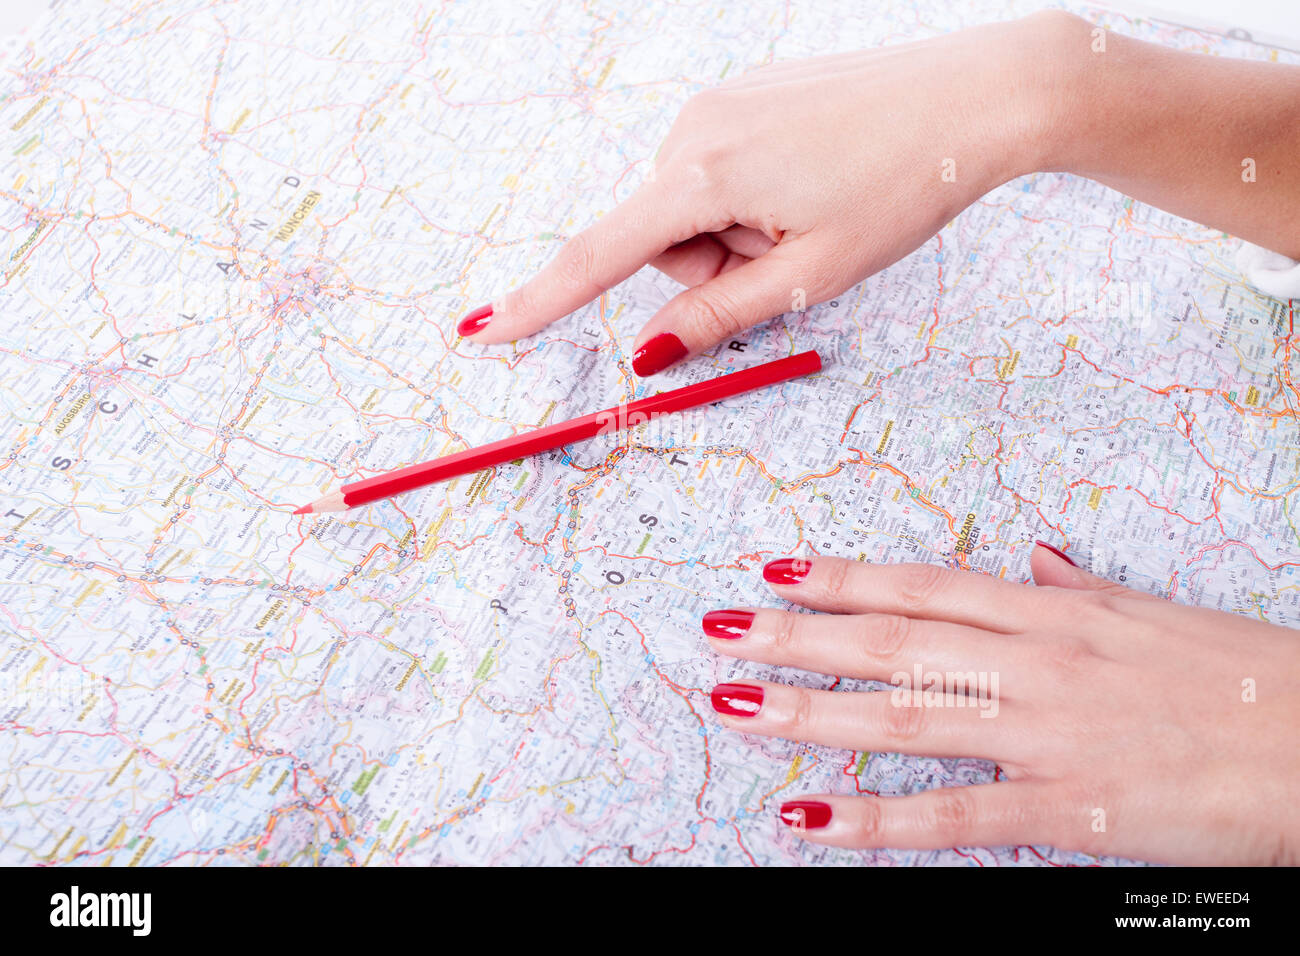 Business trip check list, woman holding red pencil Stock Photo